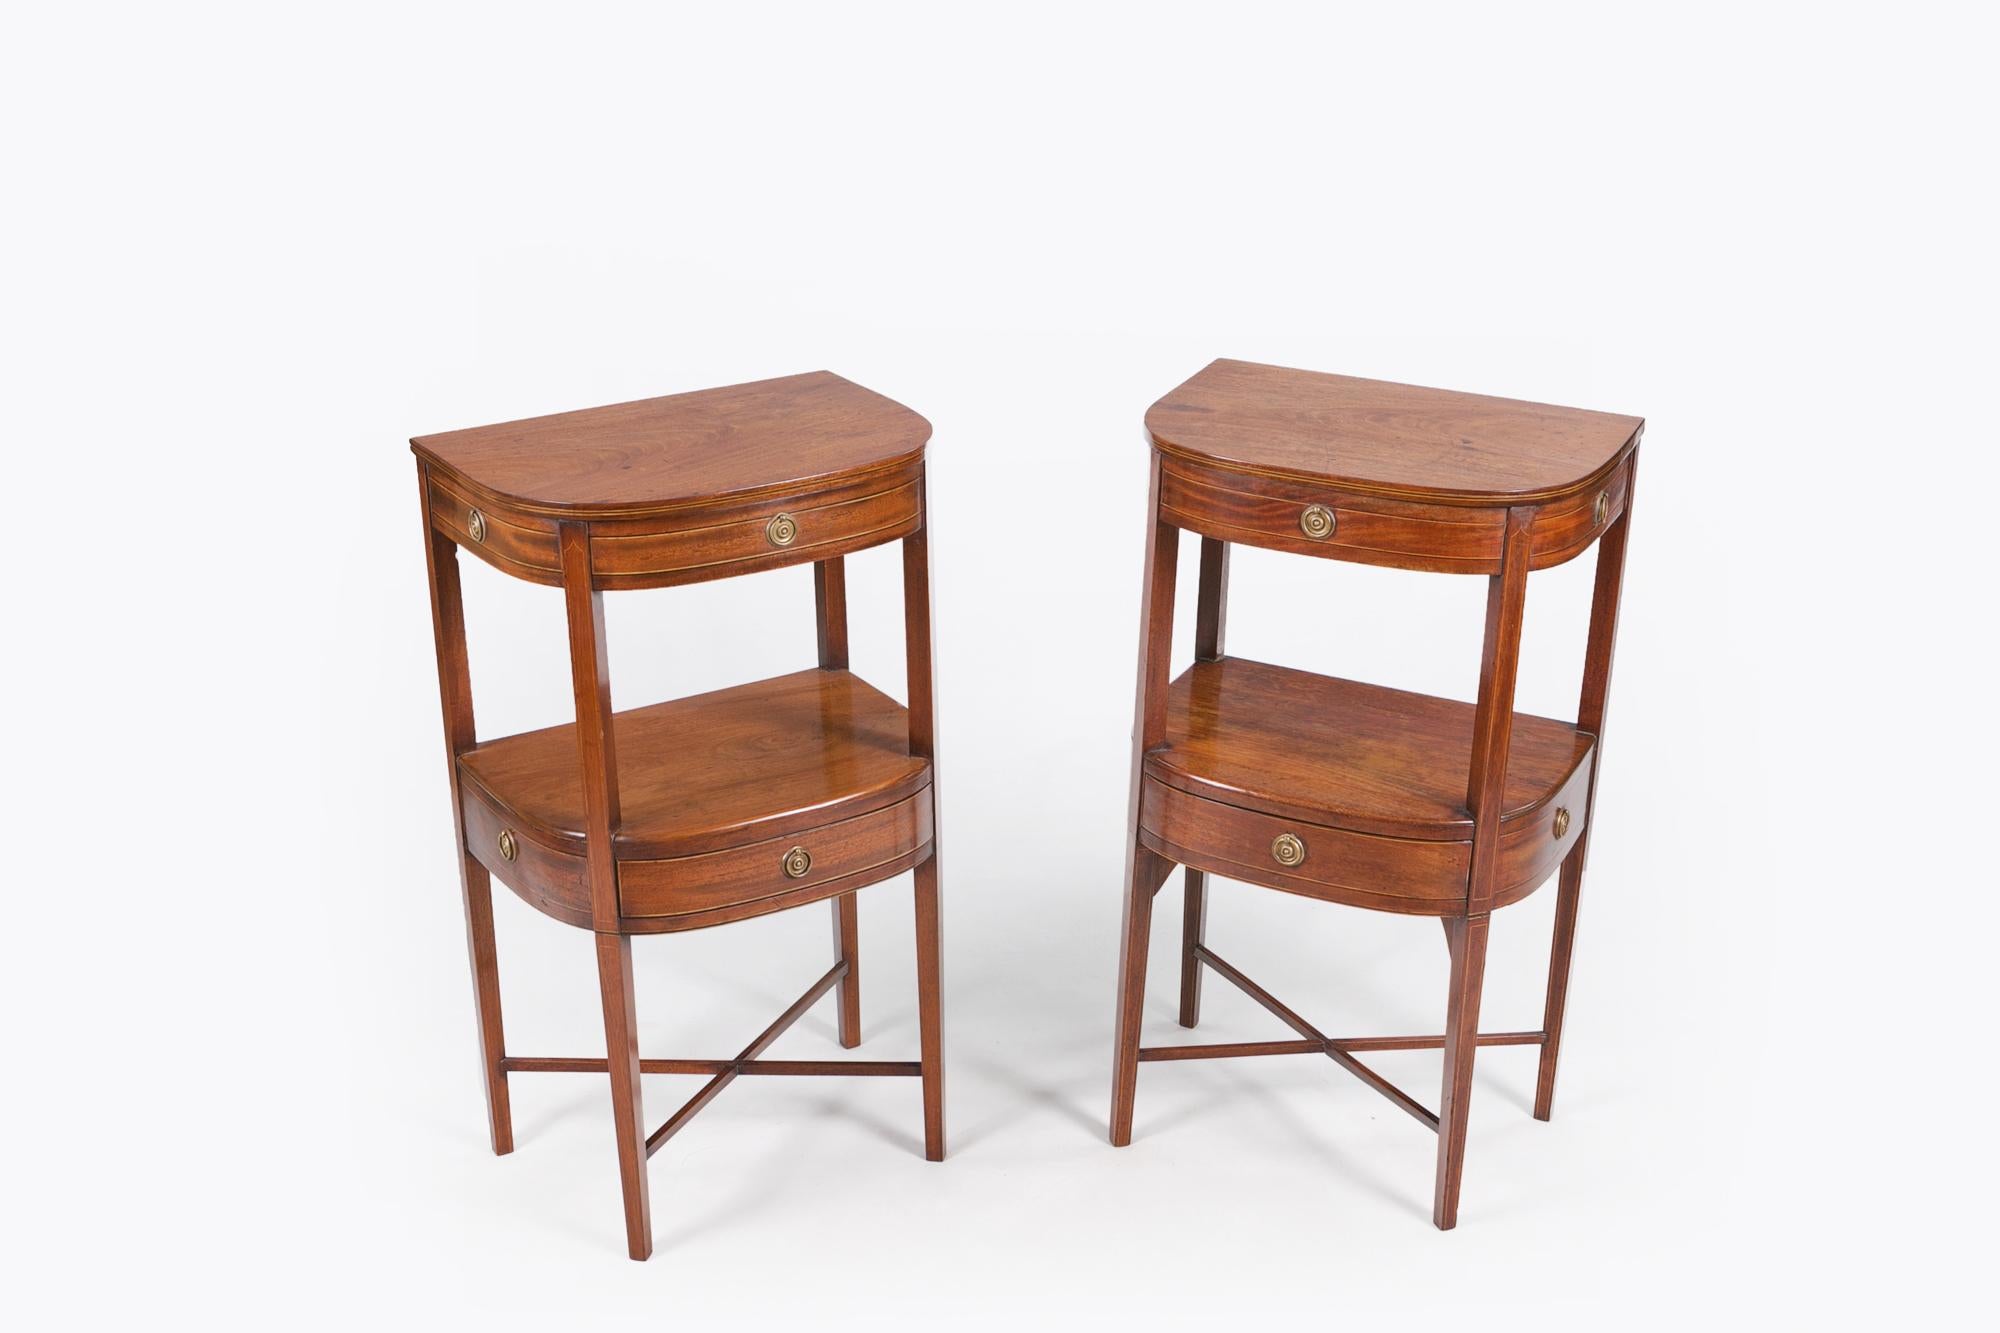 Early 19th century Regency pair of mahogany two tier bow front bedside lockers in the manner of George Hepplewhite, the moulded top with line inlaid satinwood and ebony edge raised over inlaid apron with central dummy drawer flanked with two side